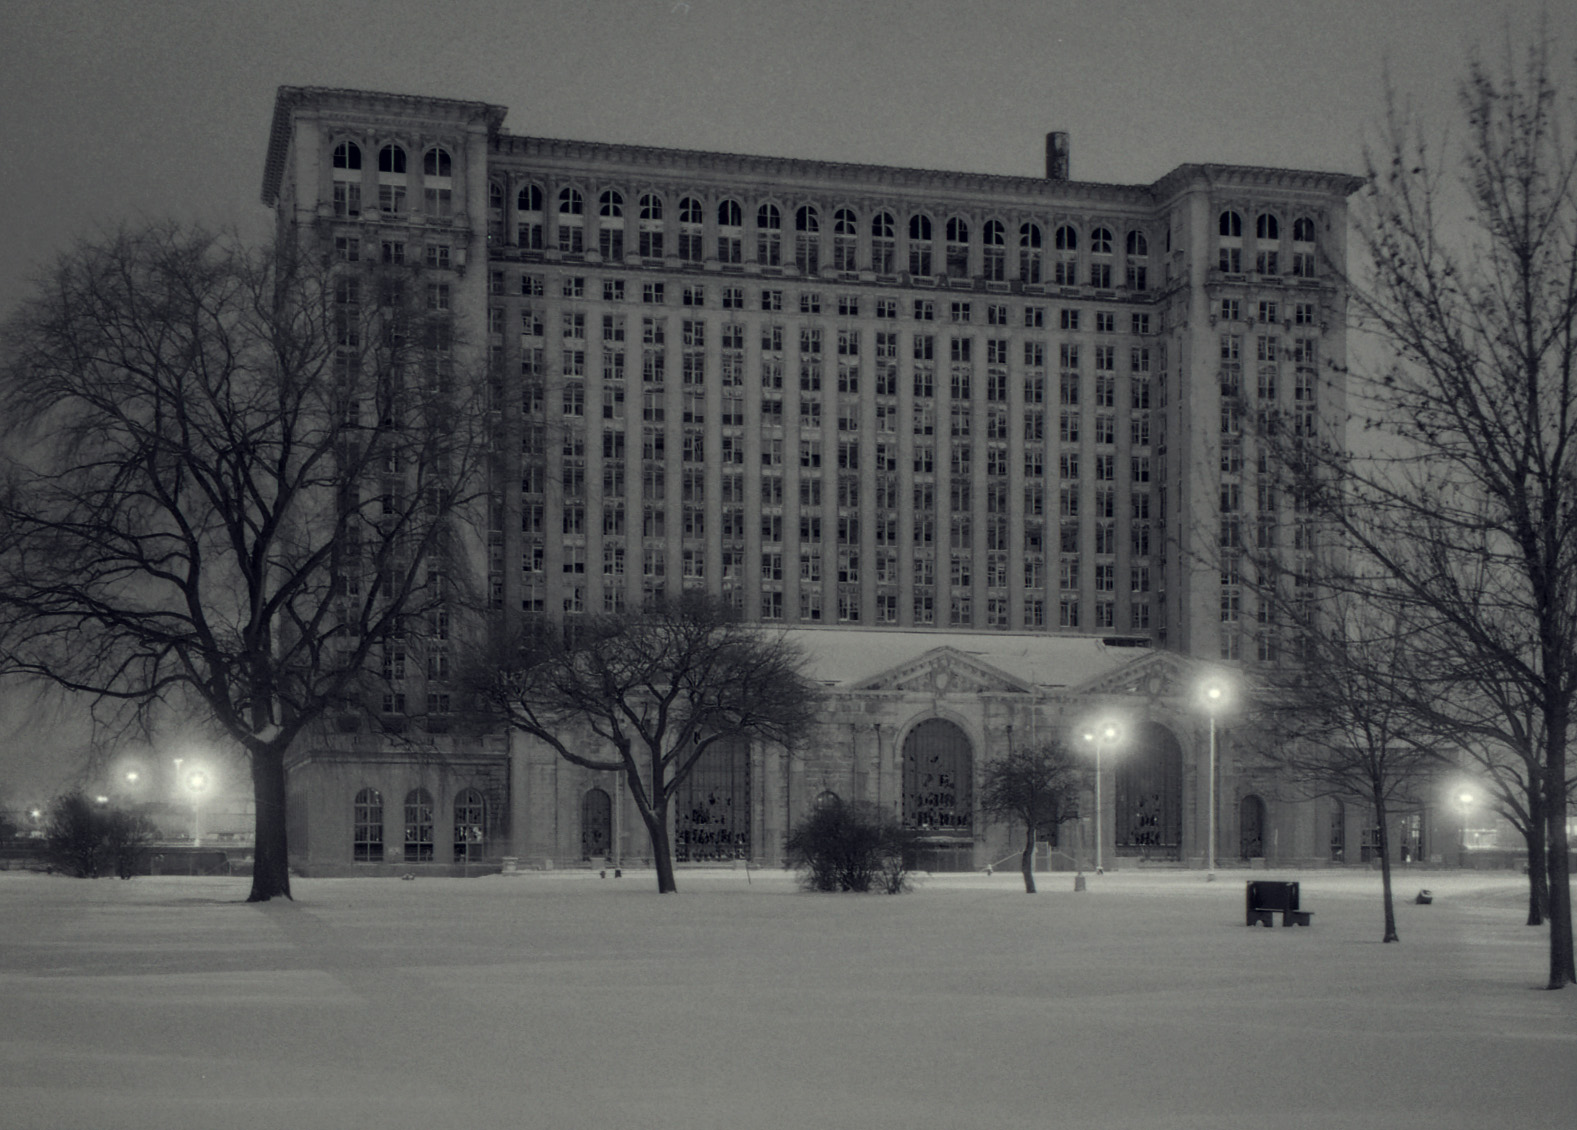 Michigan Central Station at night in snow